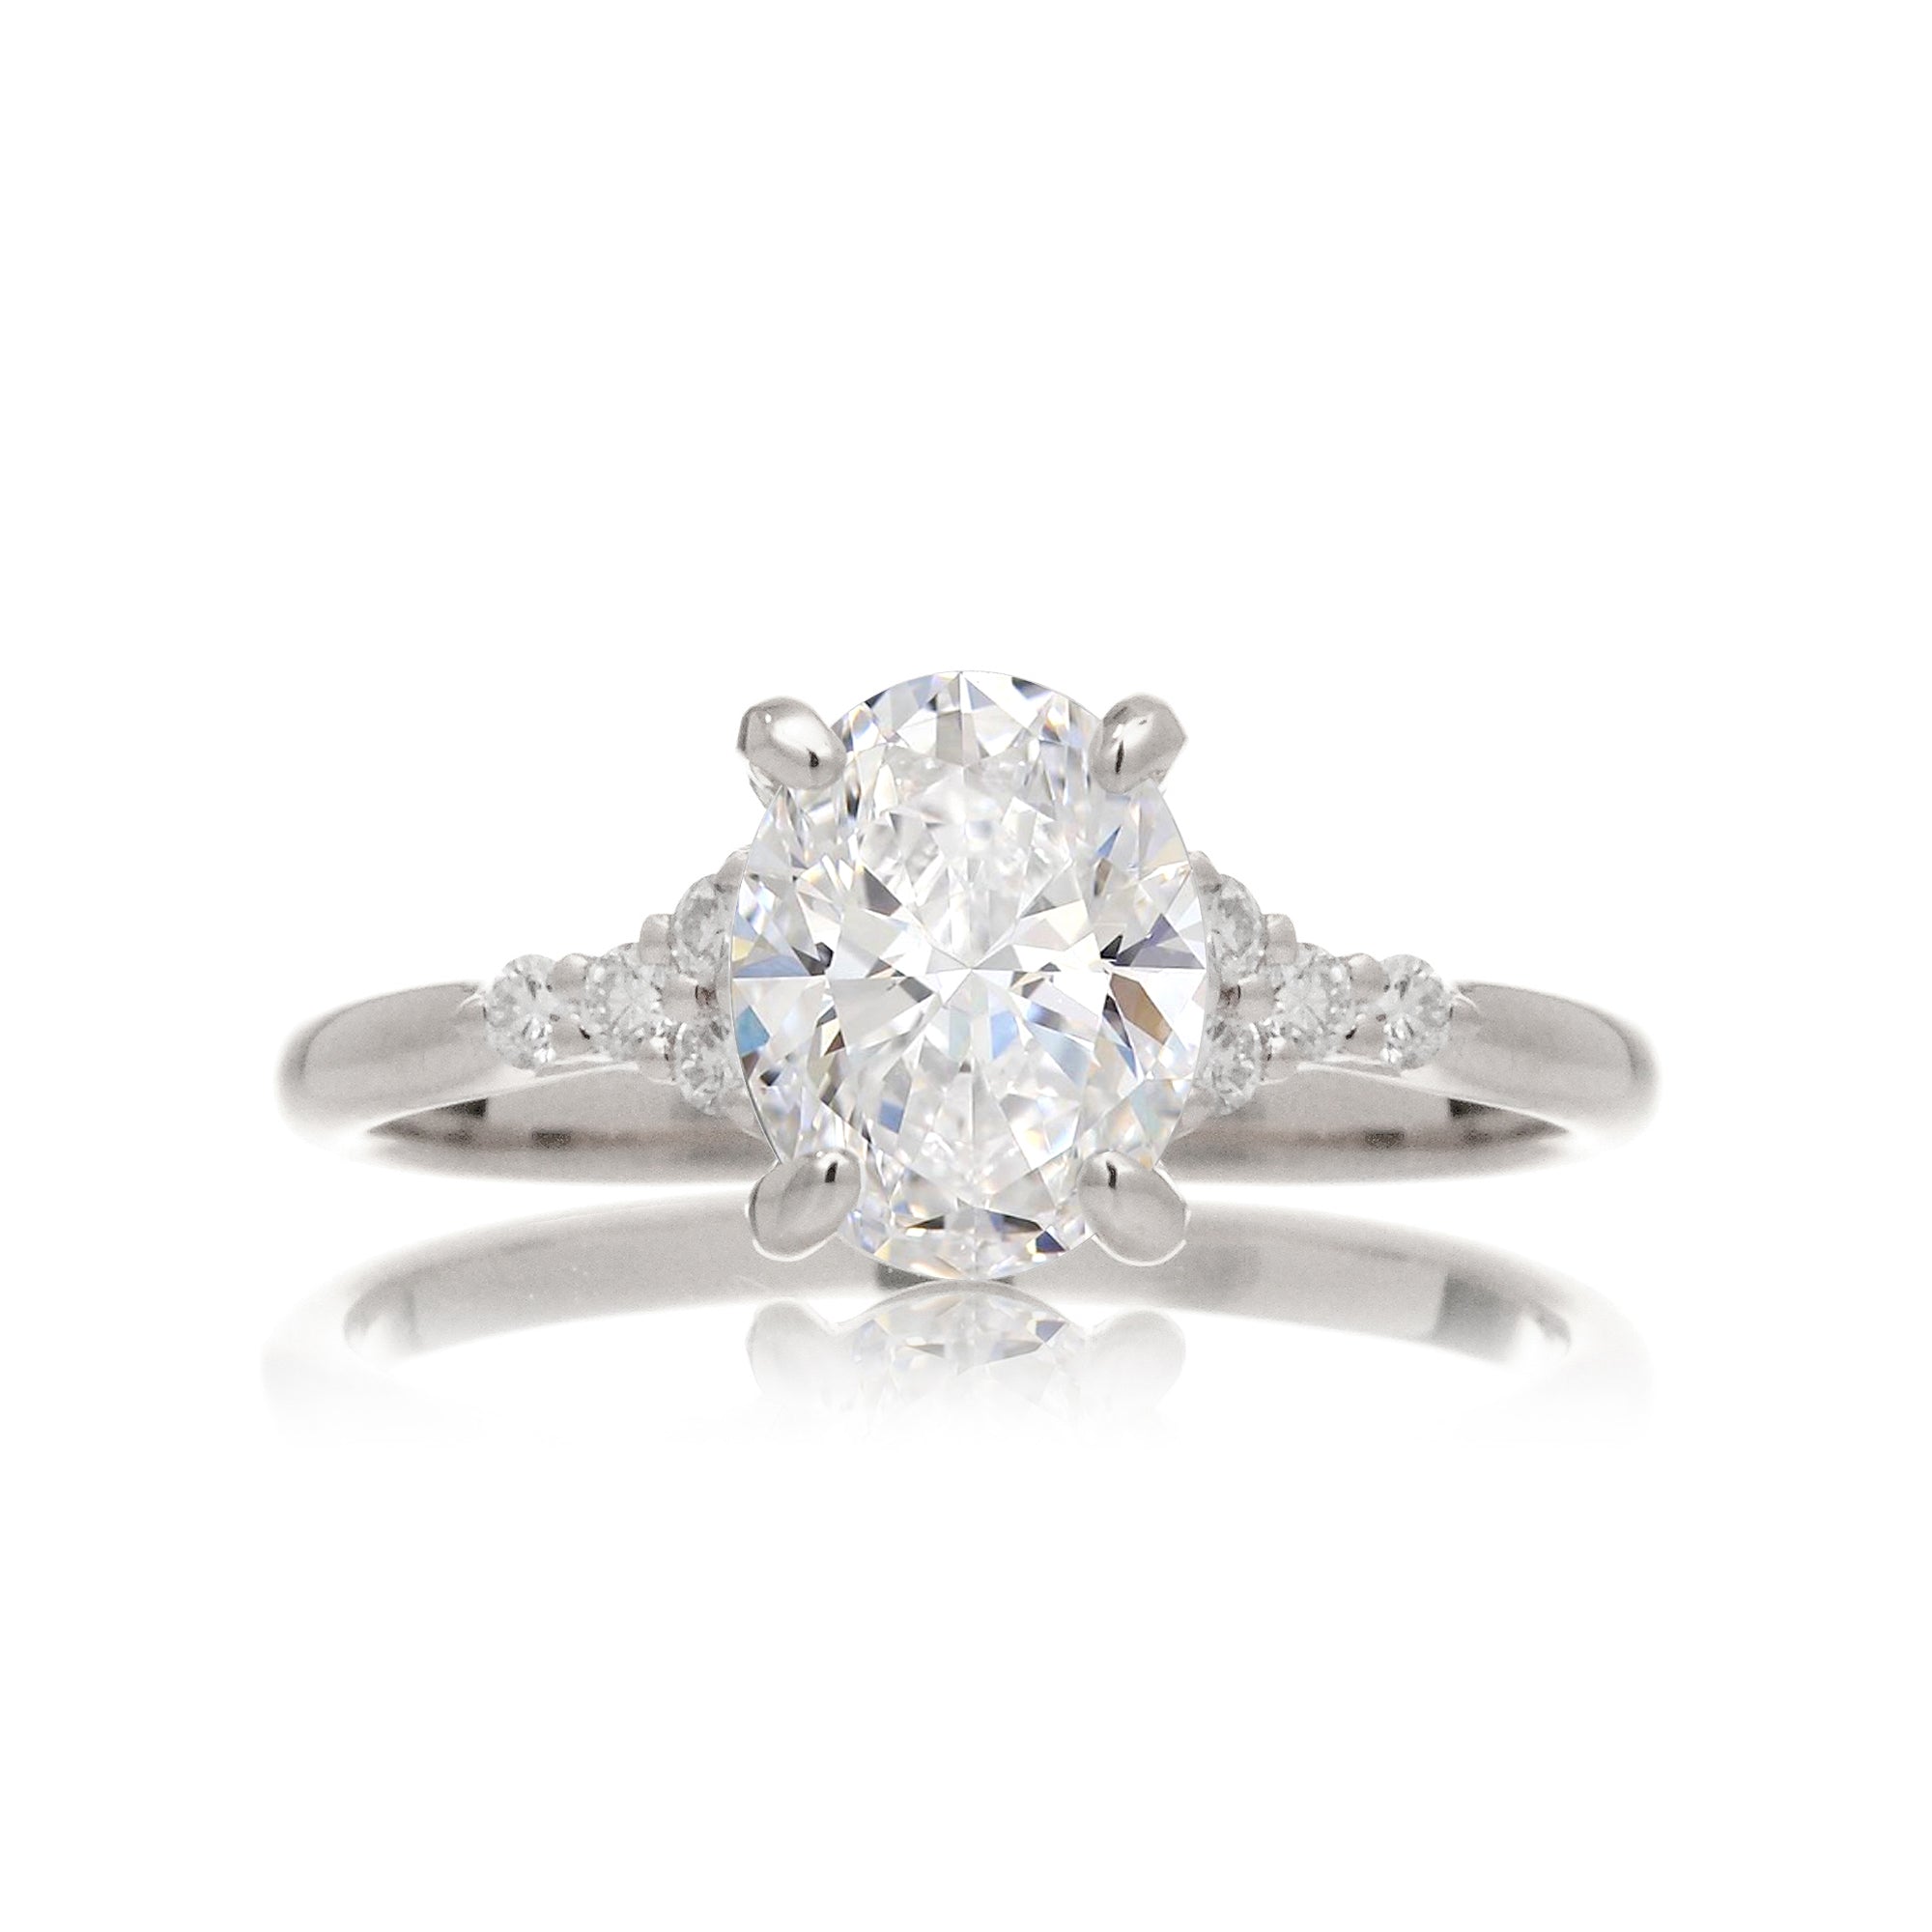 Oval diamond ring in white gold with side diamonds lab-grown - the Chloe ring